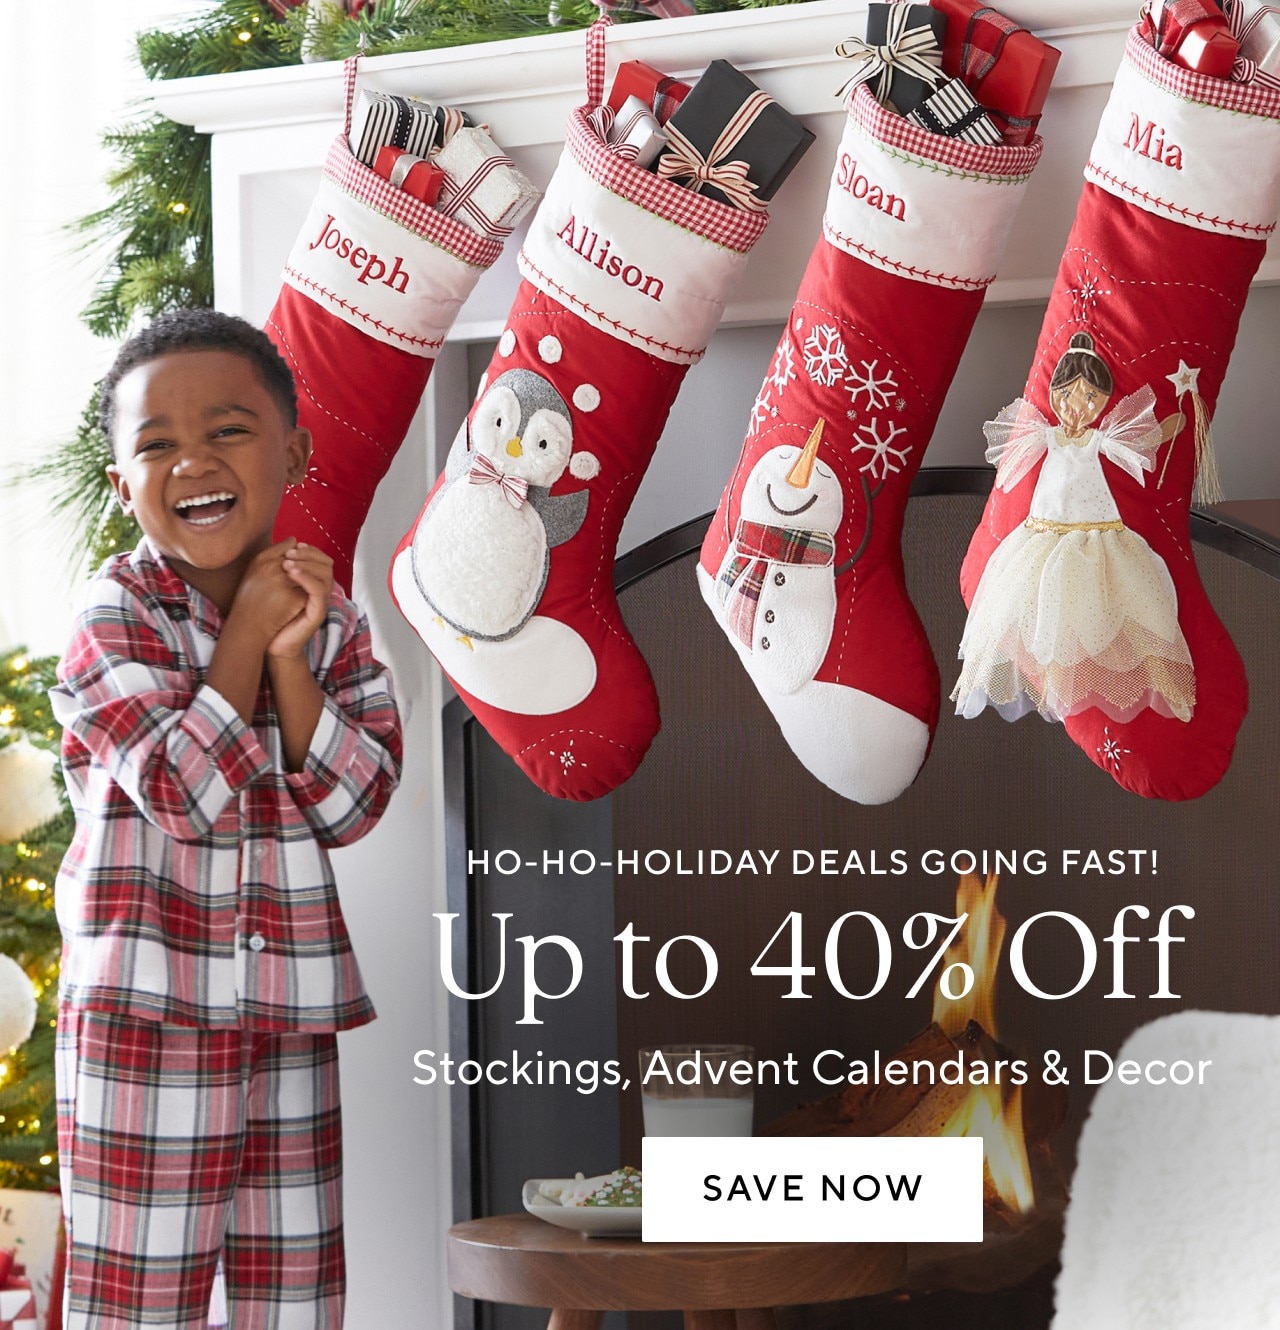 UP TO 40% OFF STOCKINGS, ADVENT CALENDARS & DECOR